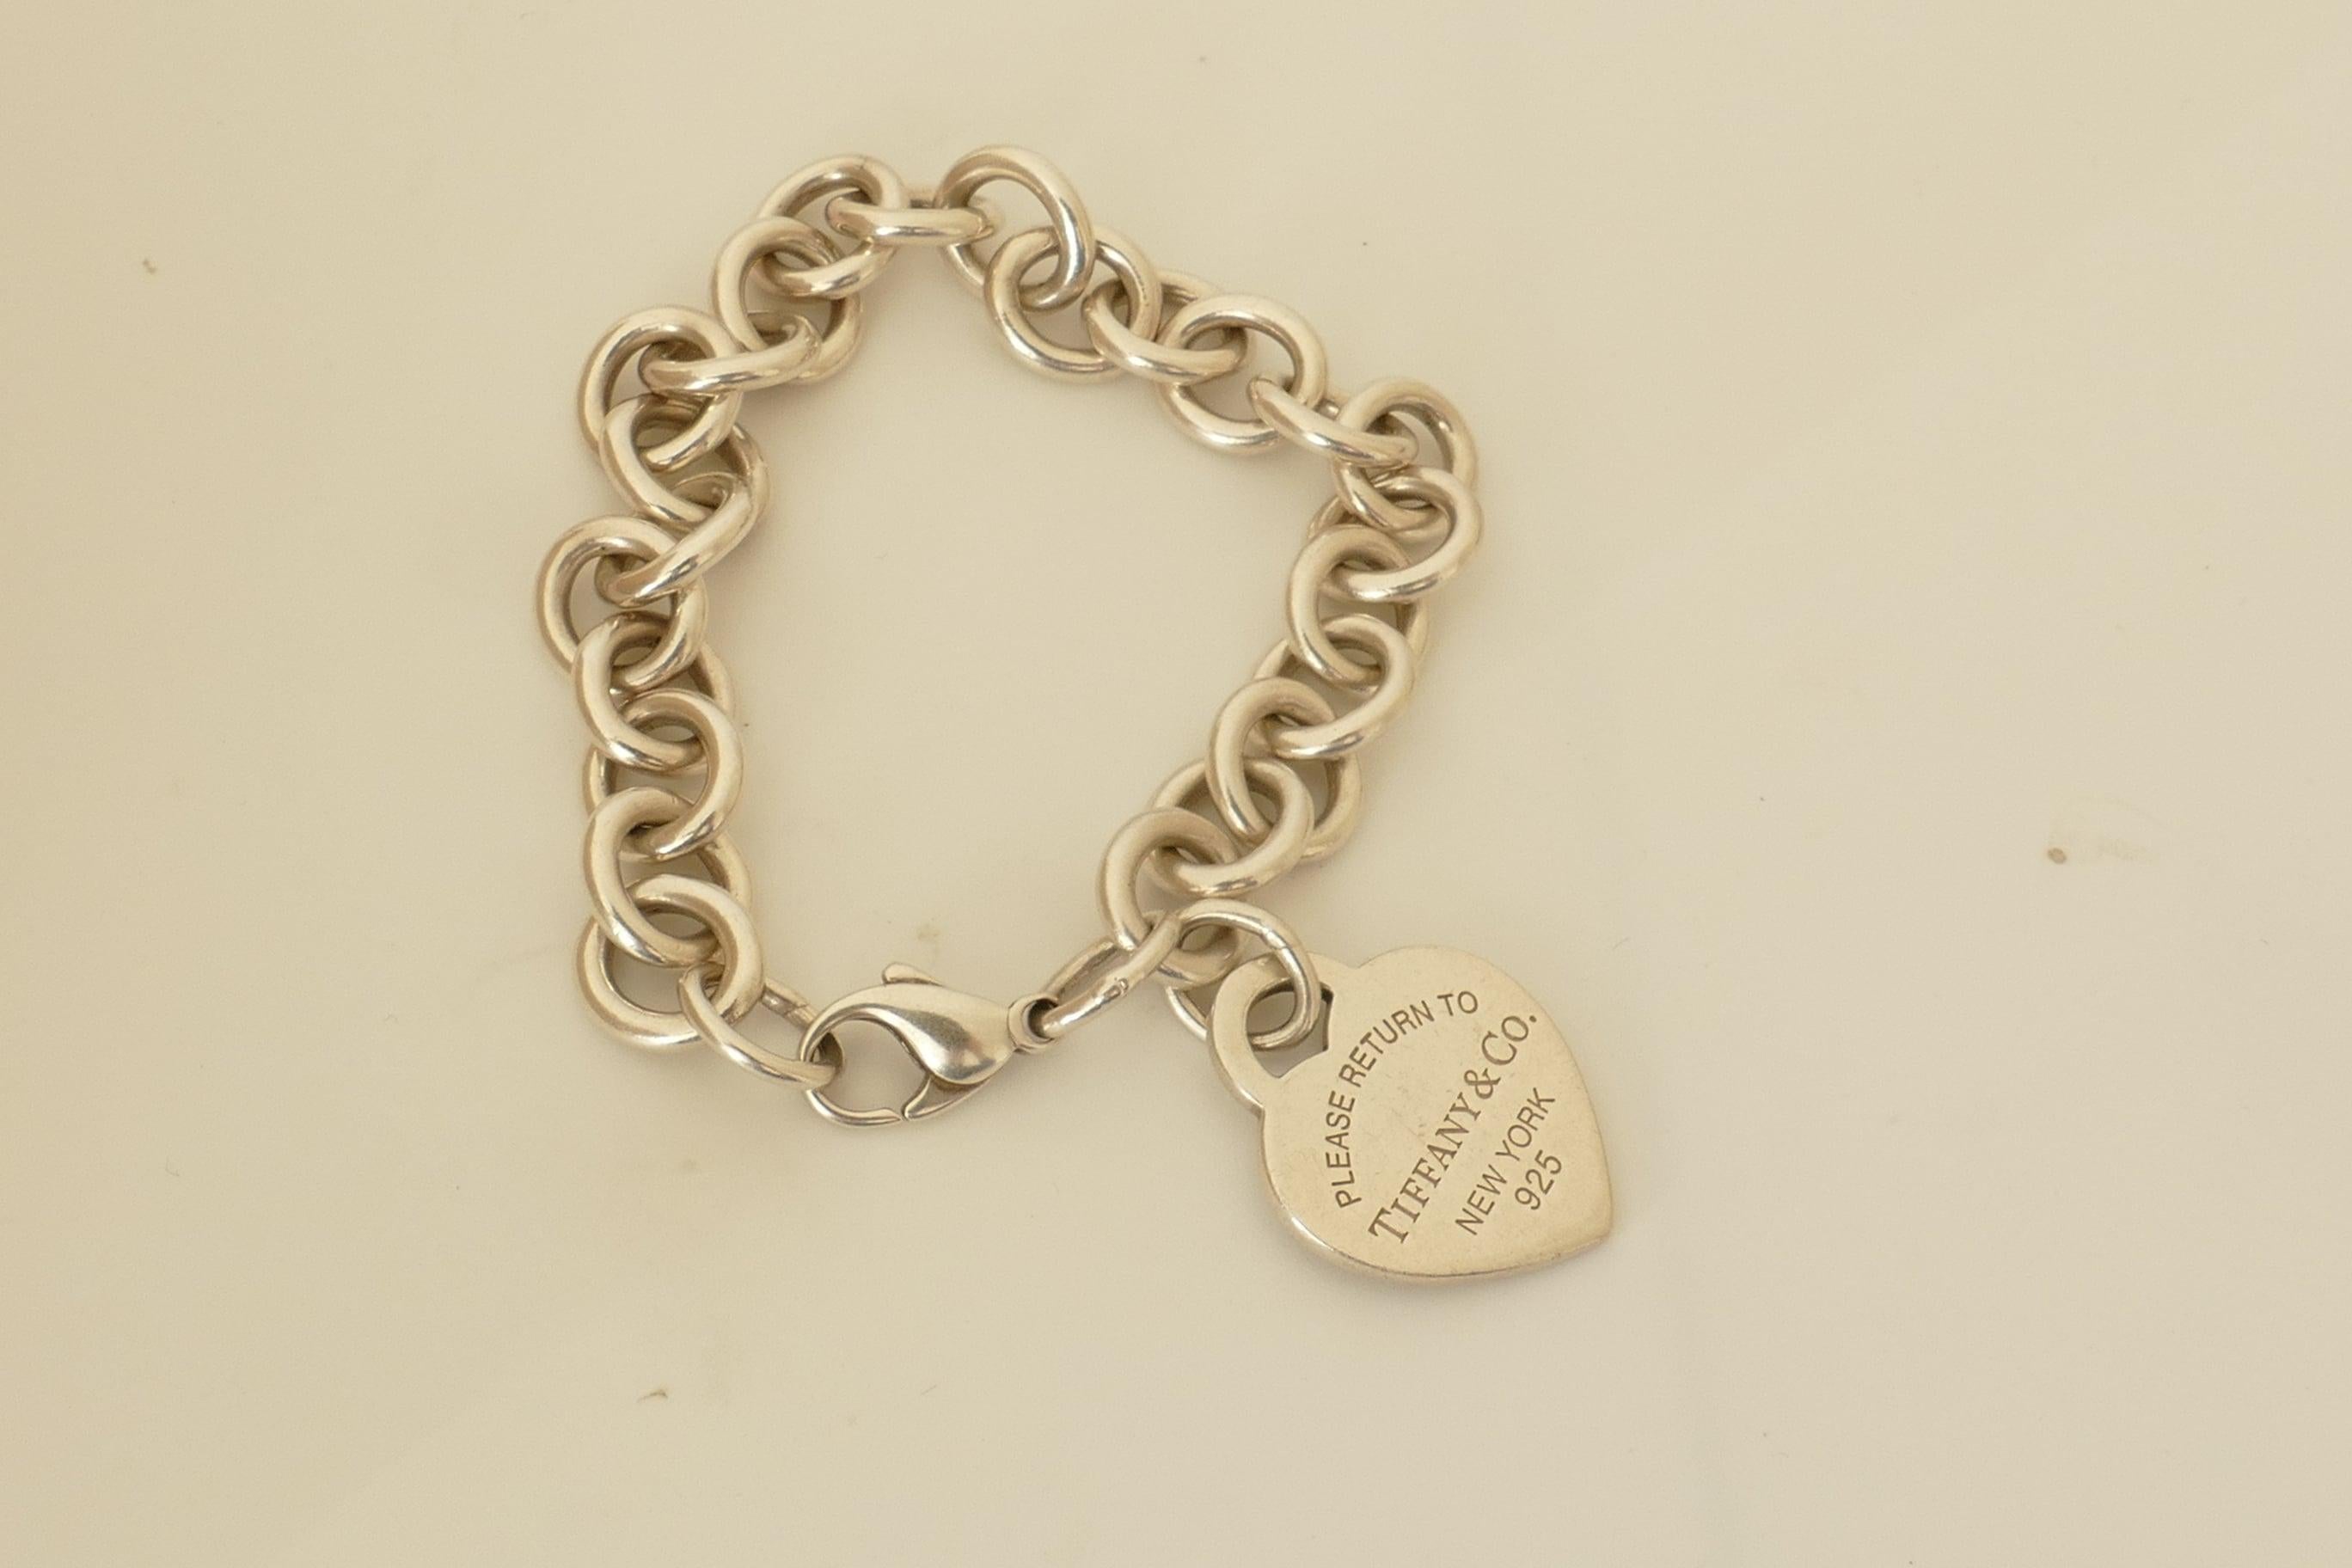 This is a brand new genuine Tiffany & Co Sterling Silver Chain Link Bracelet with a Heart Tag Charm stating 
